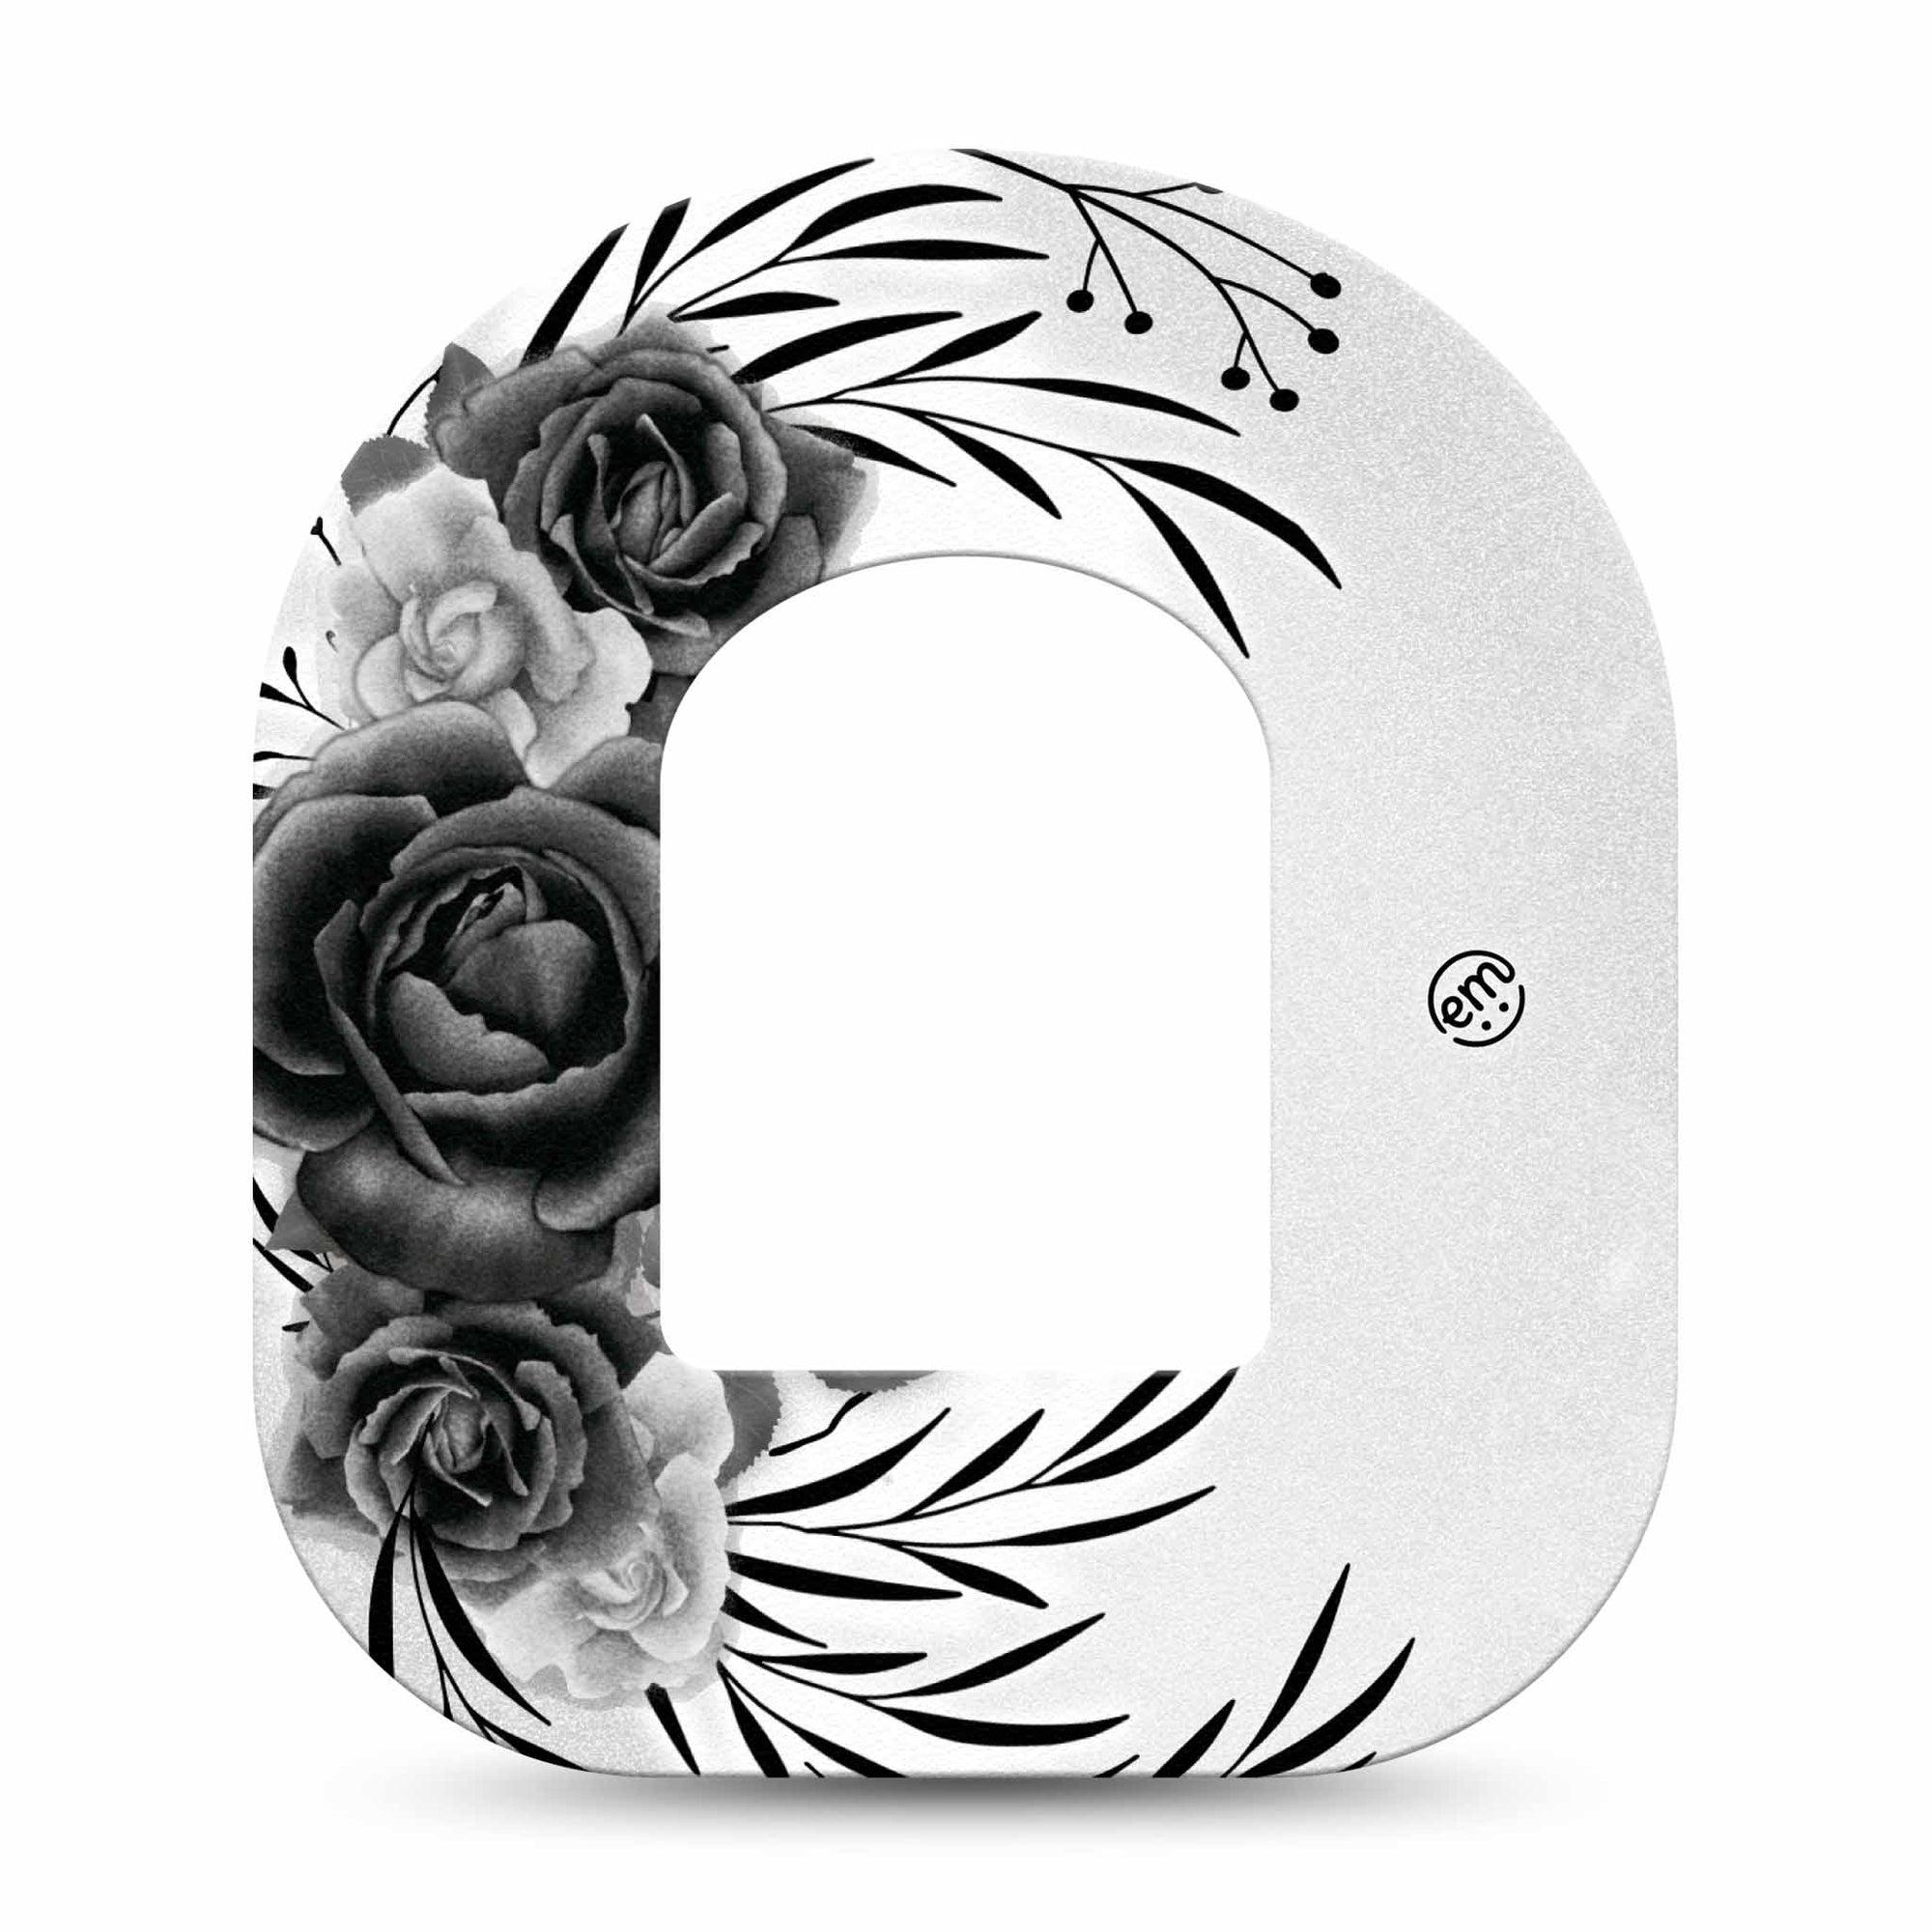 ExpressionMed Tattoo Rose Pod Tape, Single, Classic Tattoo Rose Inspired Design Pod Adhesive Patch